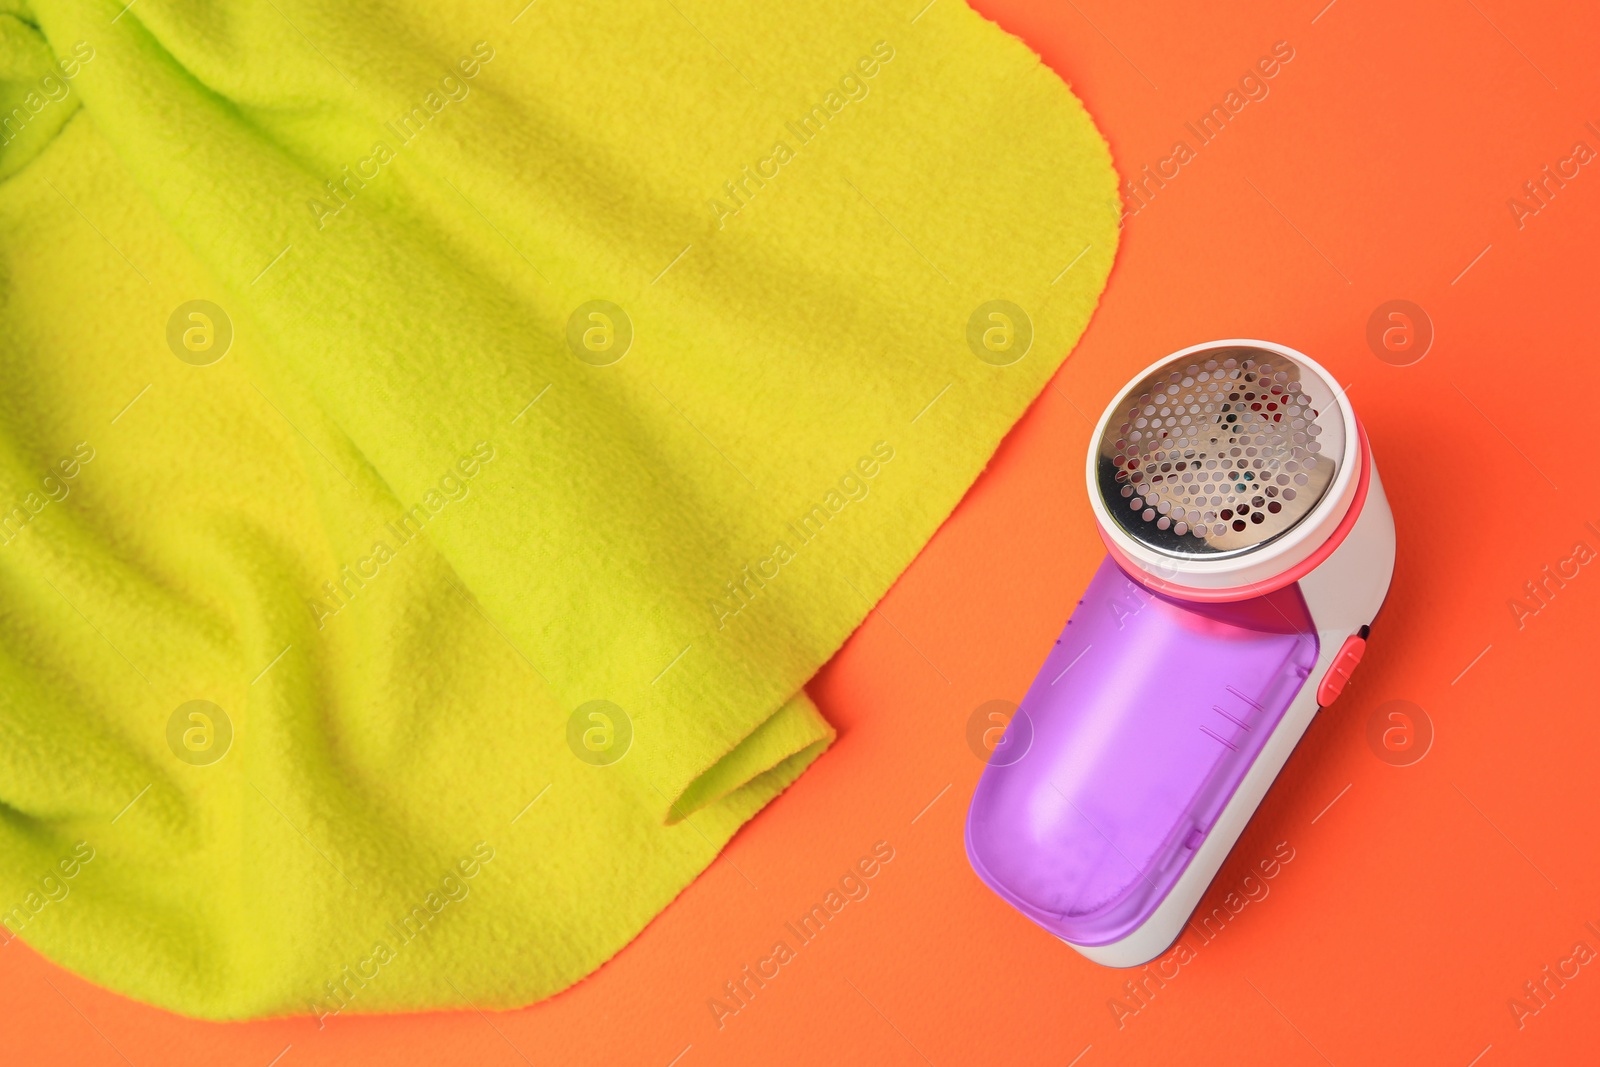 Photo of Fabric shaver and light green cloth on orange background, above view